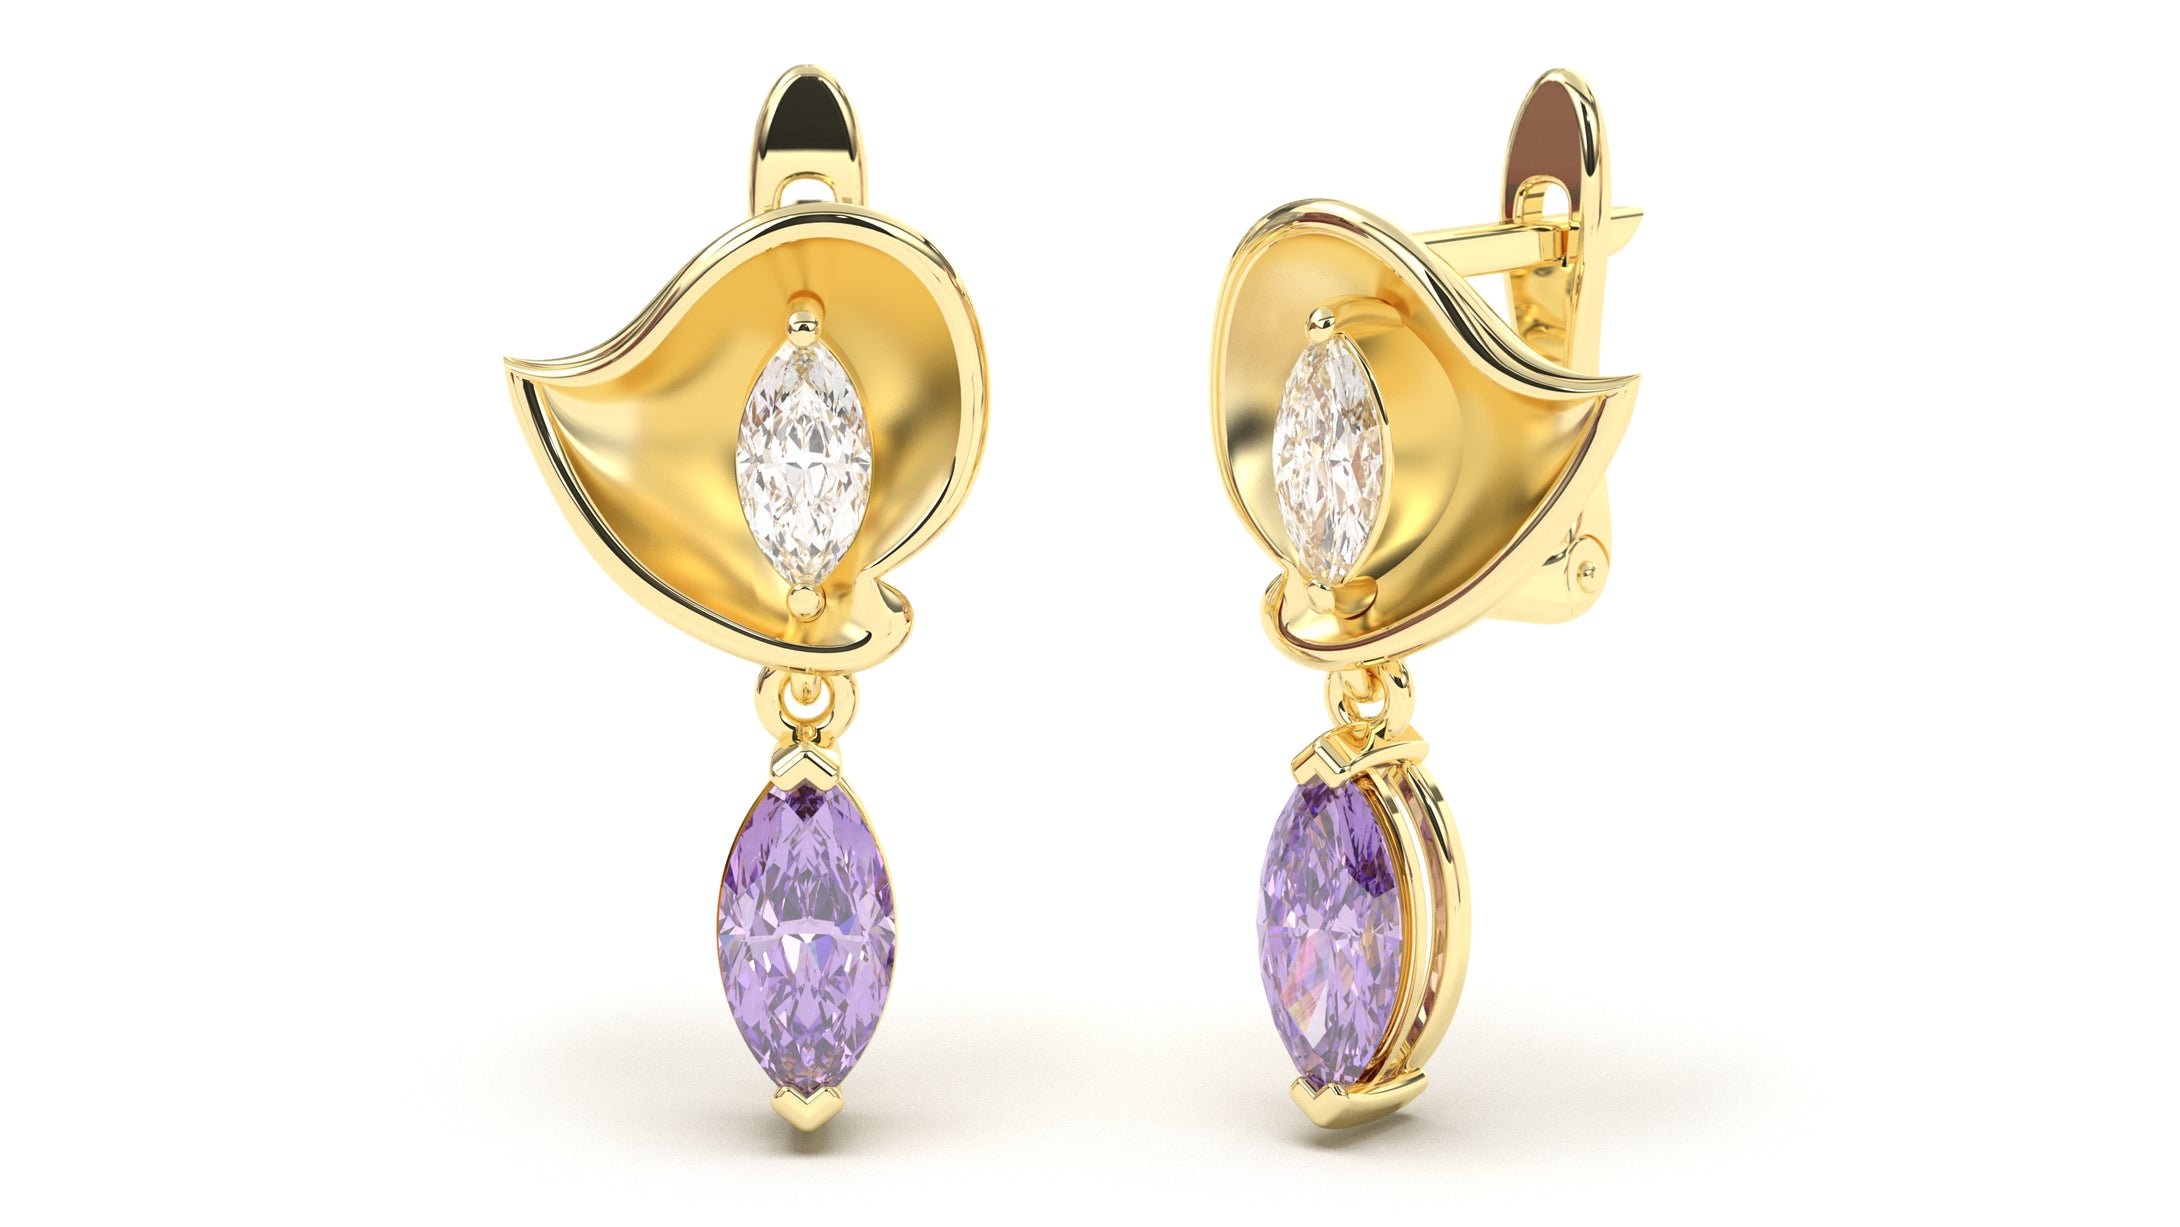 Earrings with Marquise Amethysts and Marquise White Diamonds | Bloom Flora IV